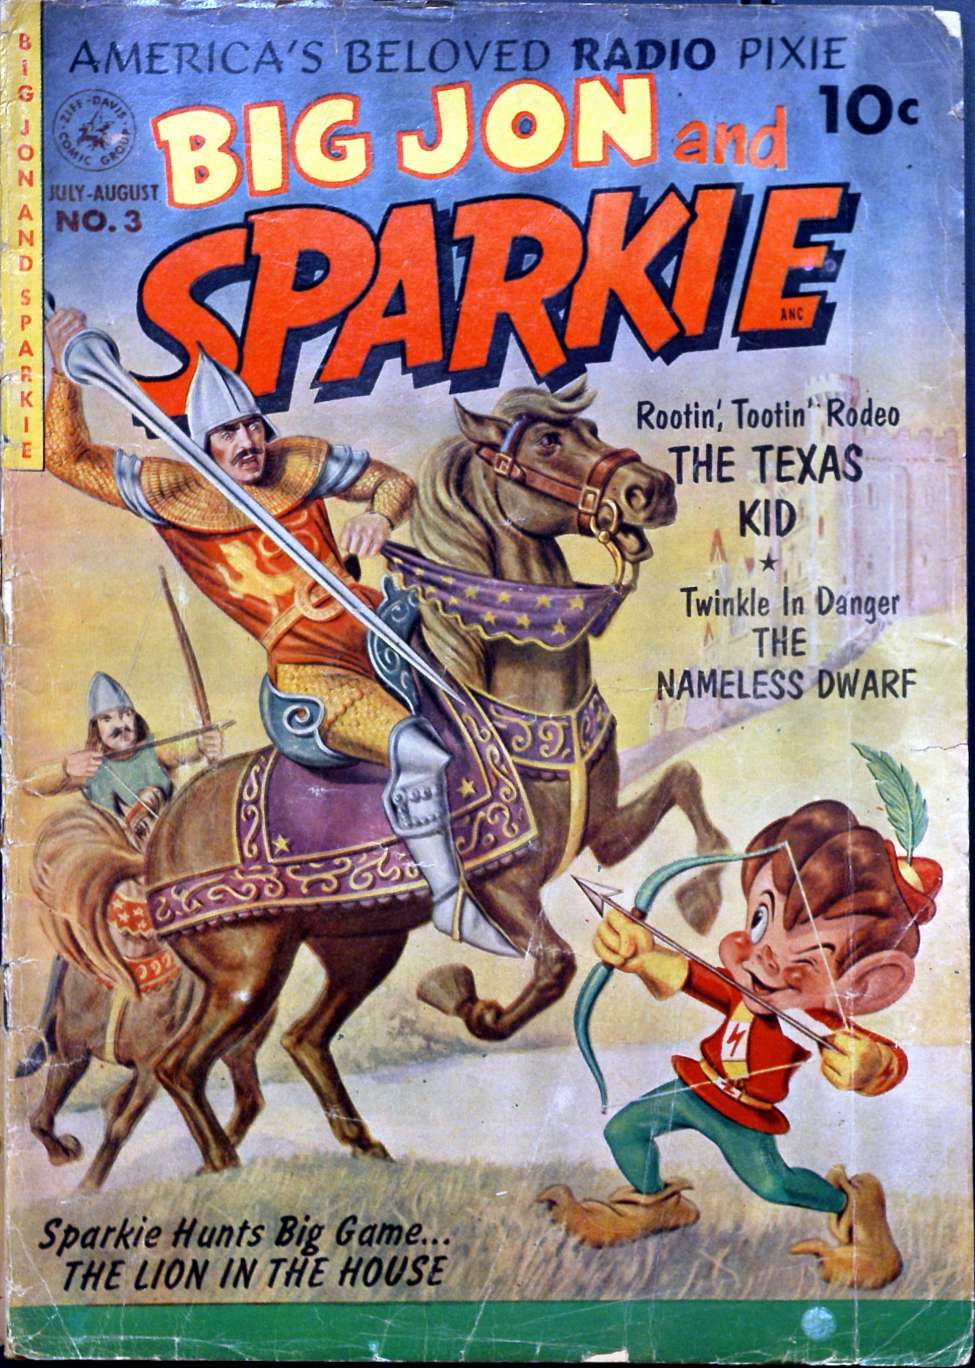 Comic Book Cover For Sparkie, Radio Pixie 3